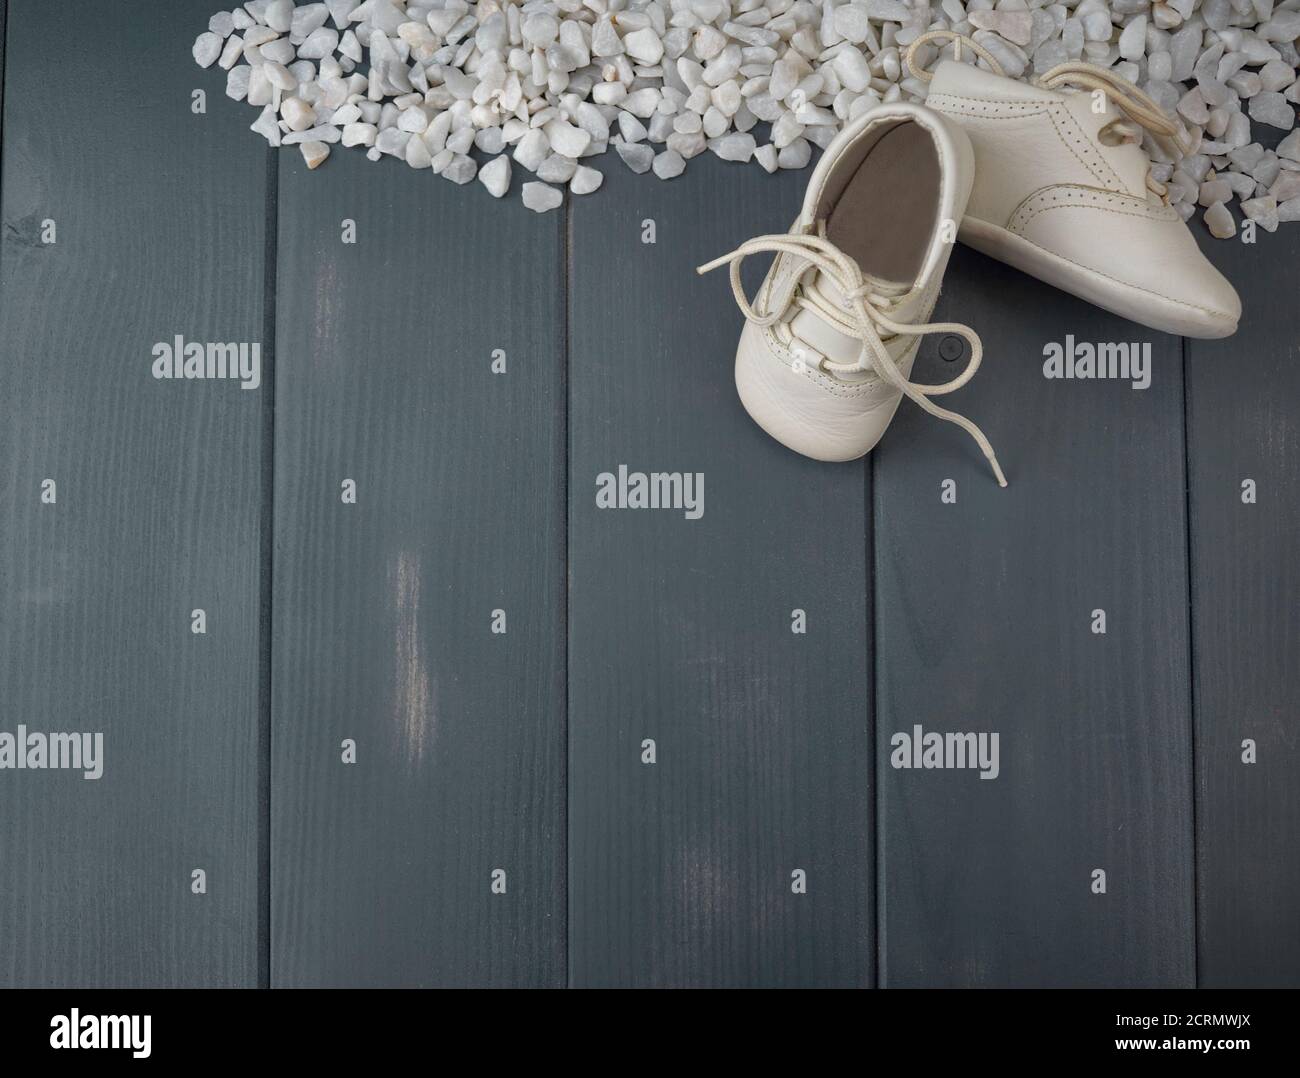 White newborn shoes, with tied laces, on a bed of white stones and gray wood Stock Photo